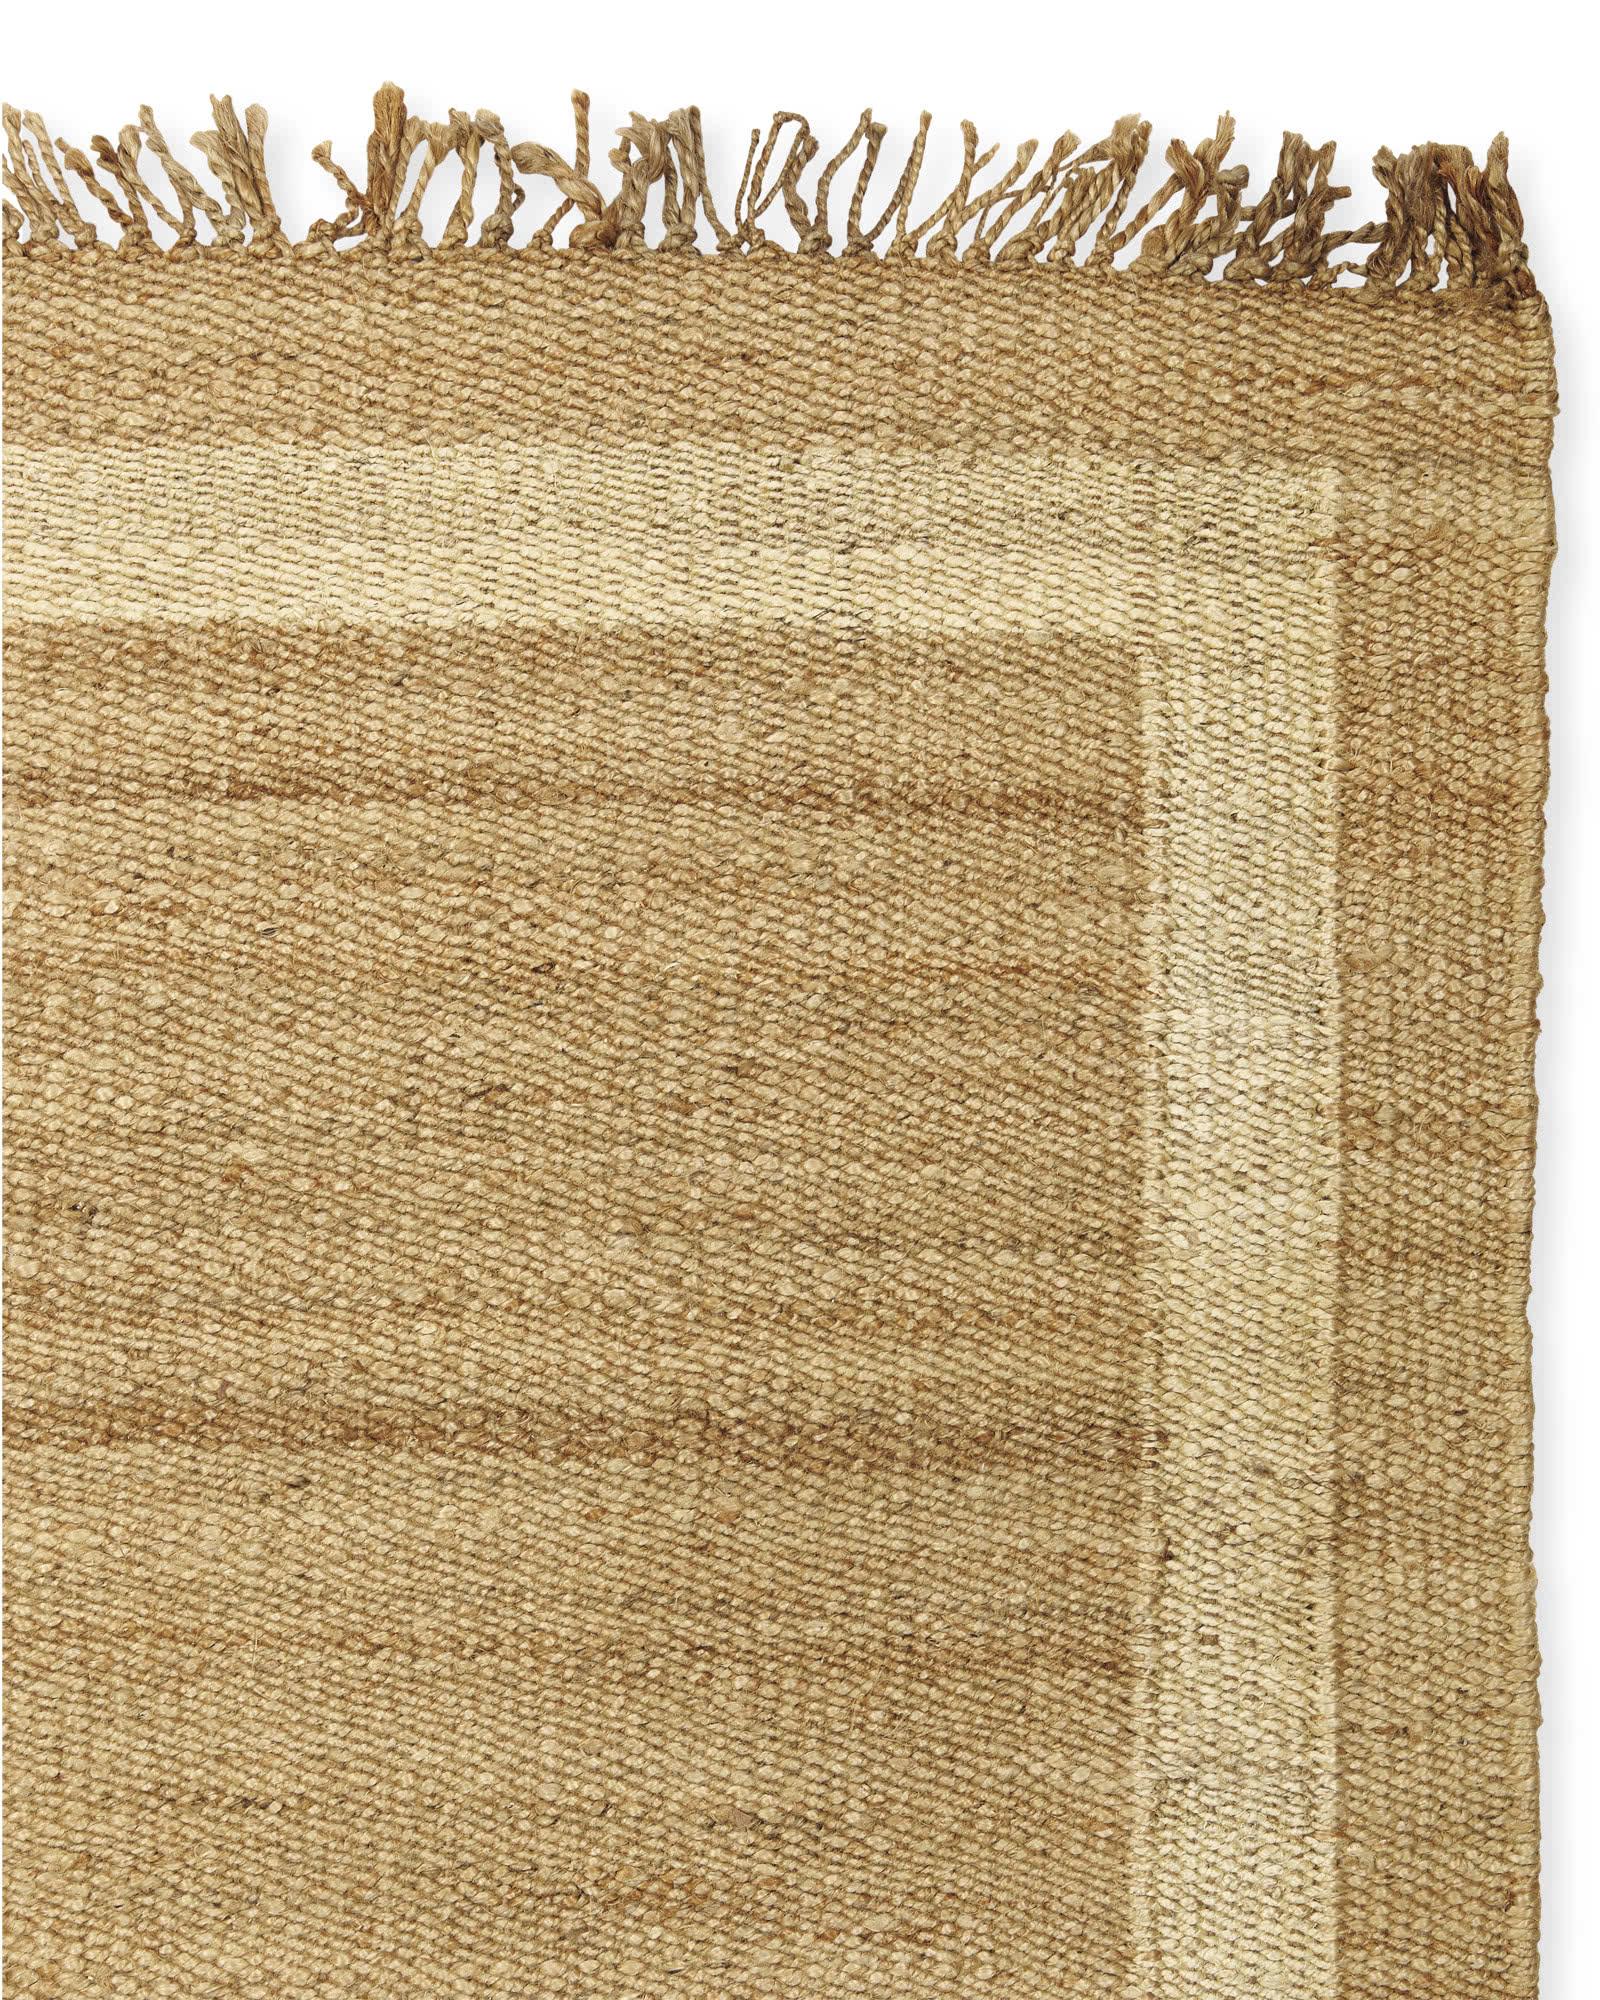 Jute Border Rug in Ivory White, 12' x 18' | Serena & Lily